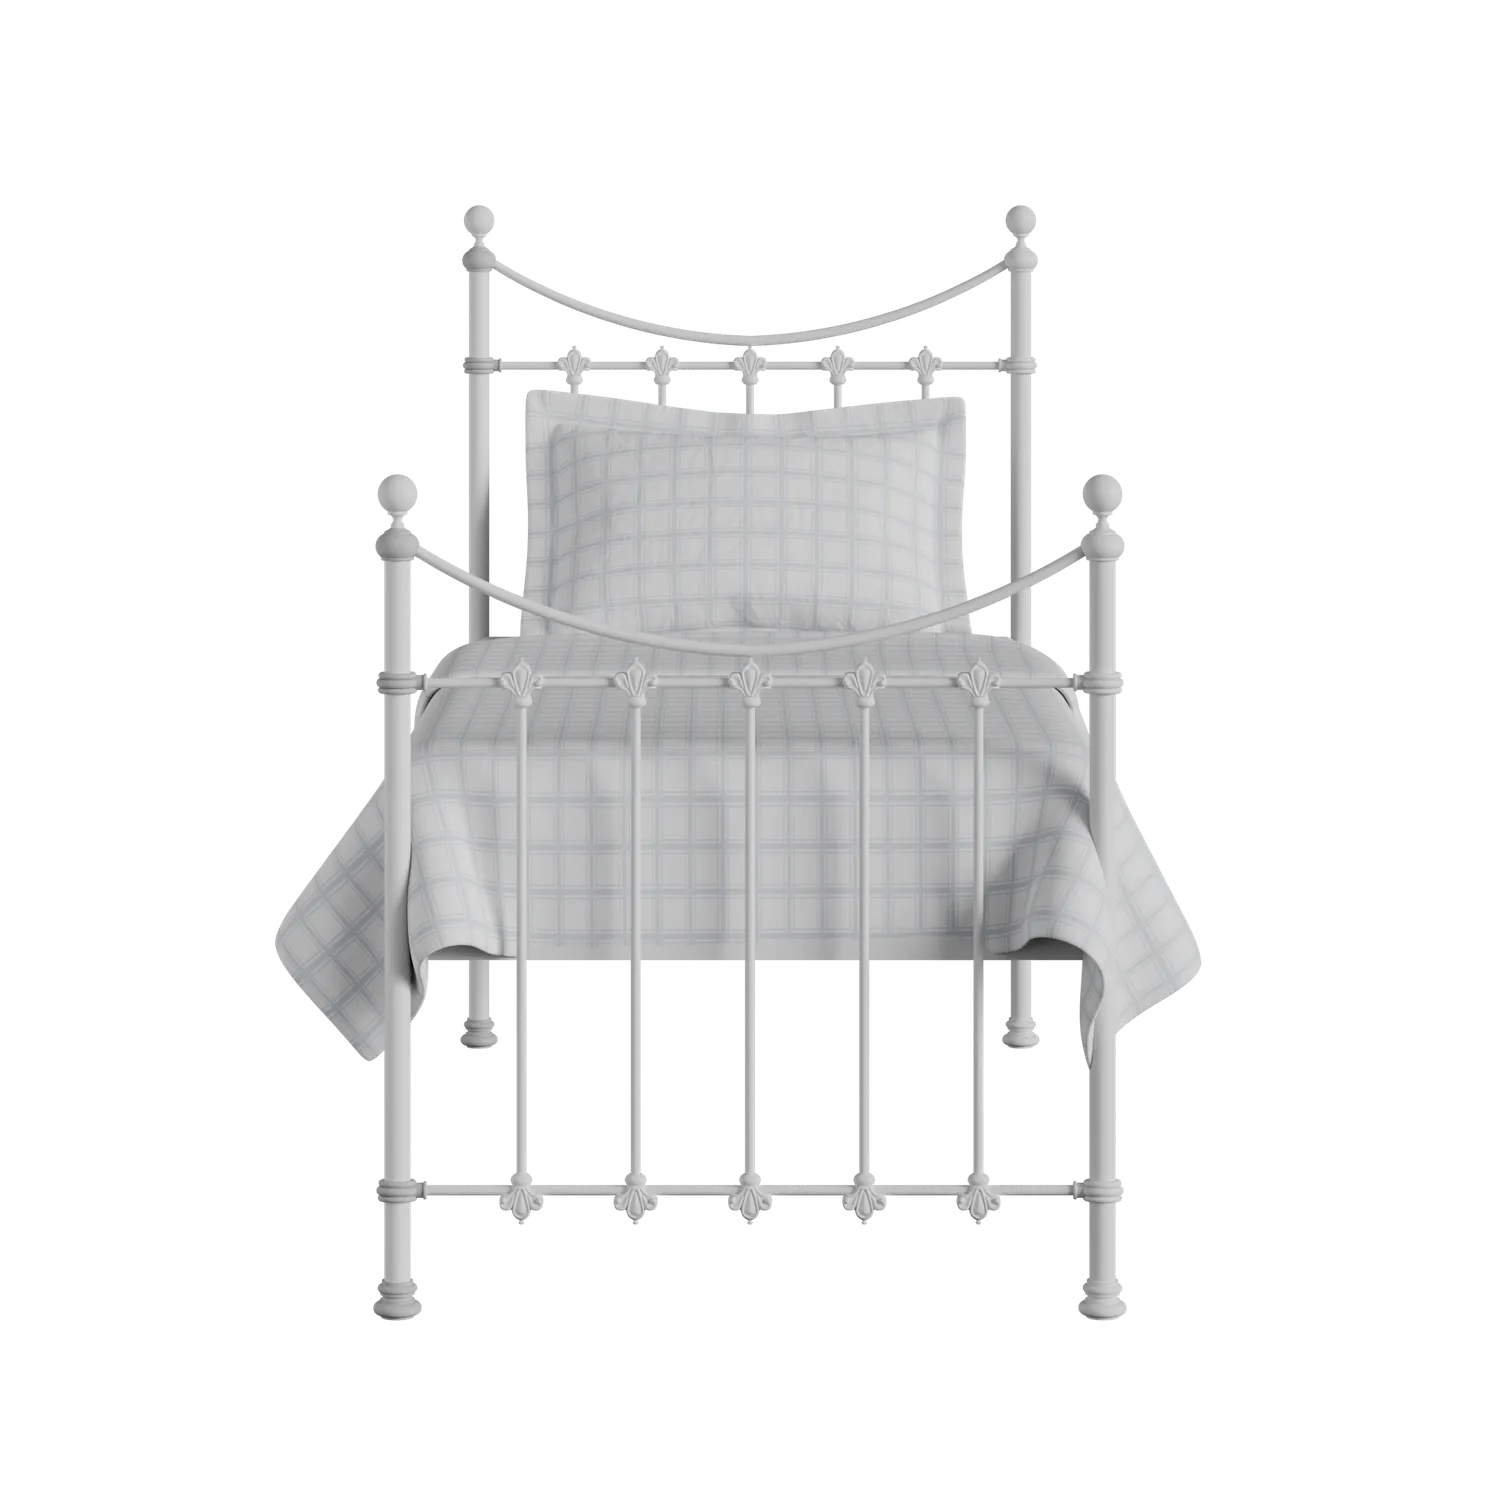 Chatsworth iron/metal single bed in white